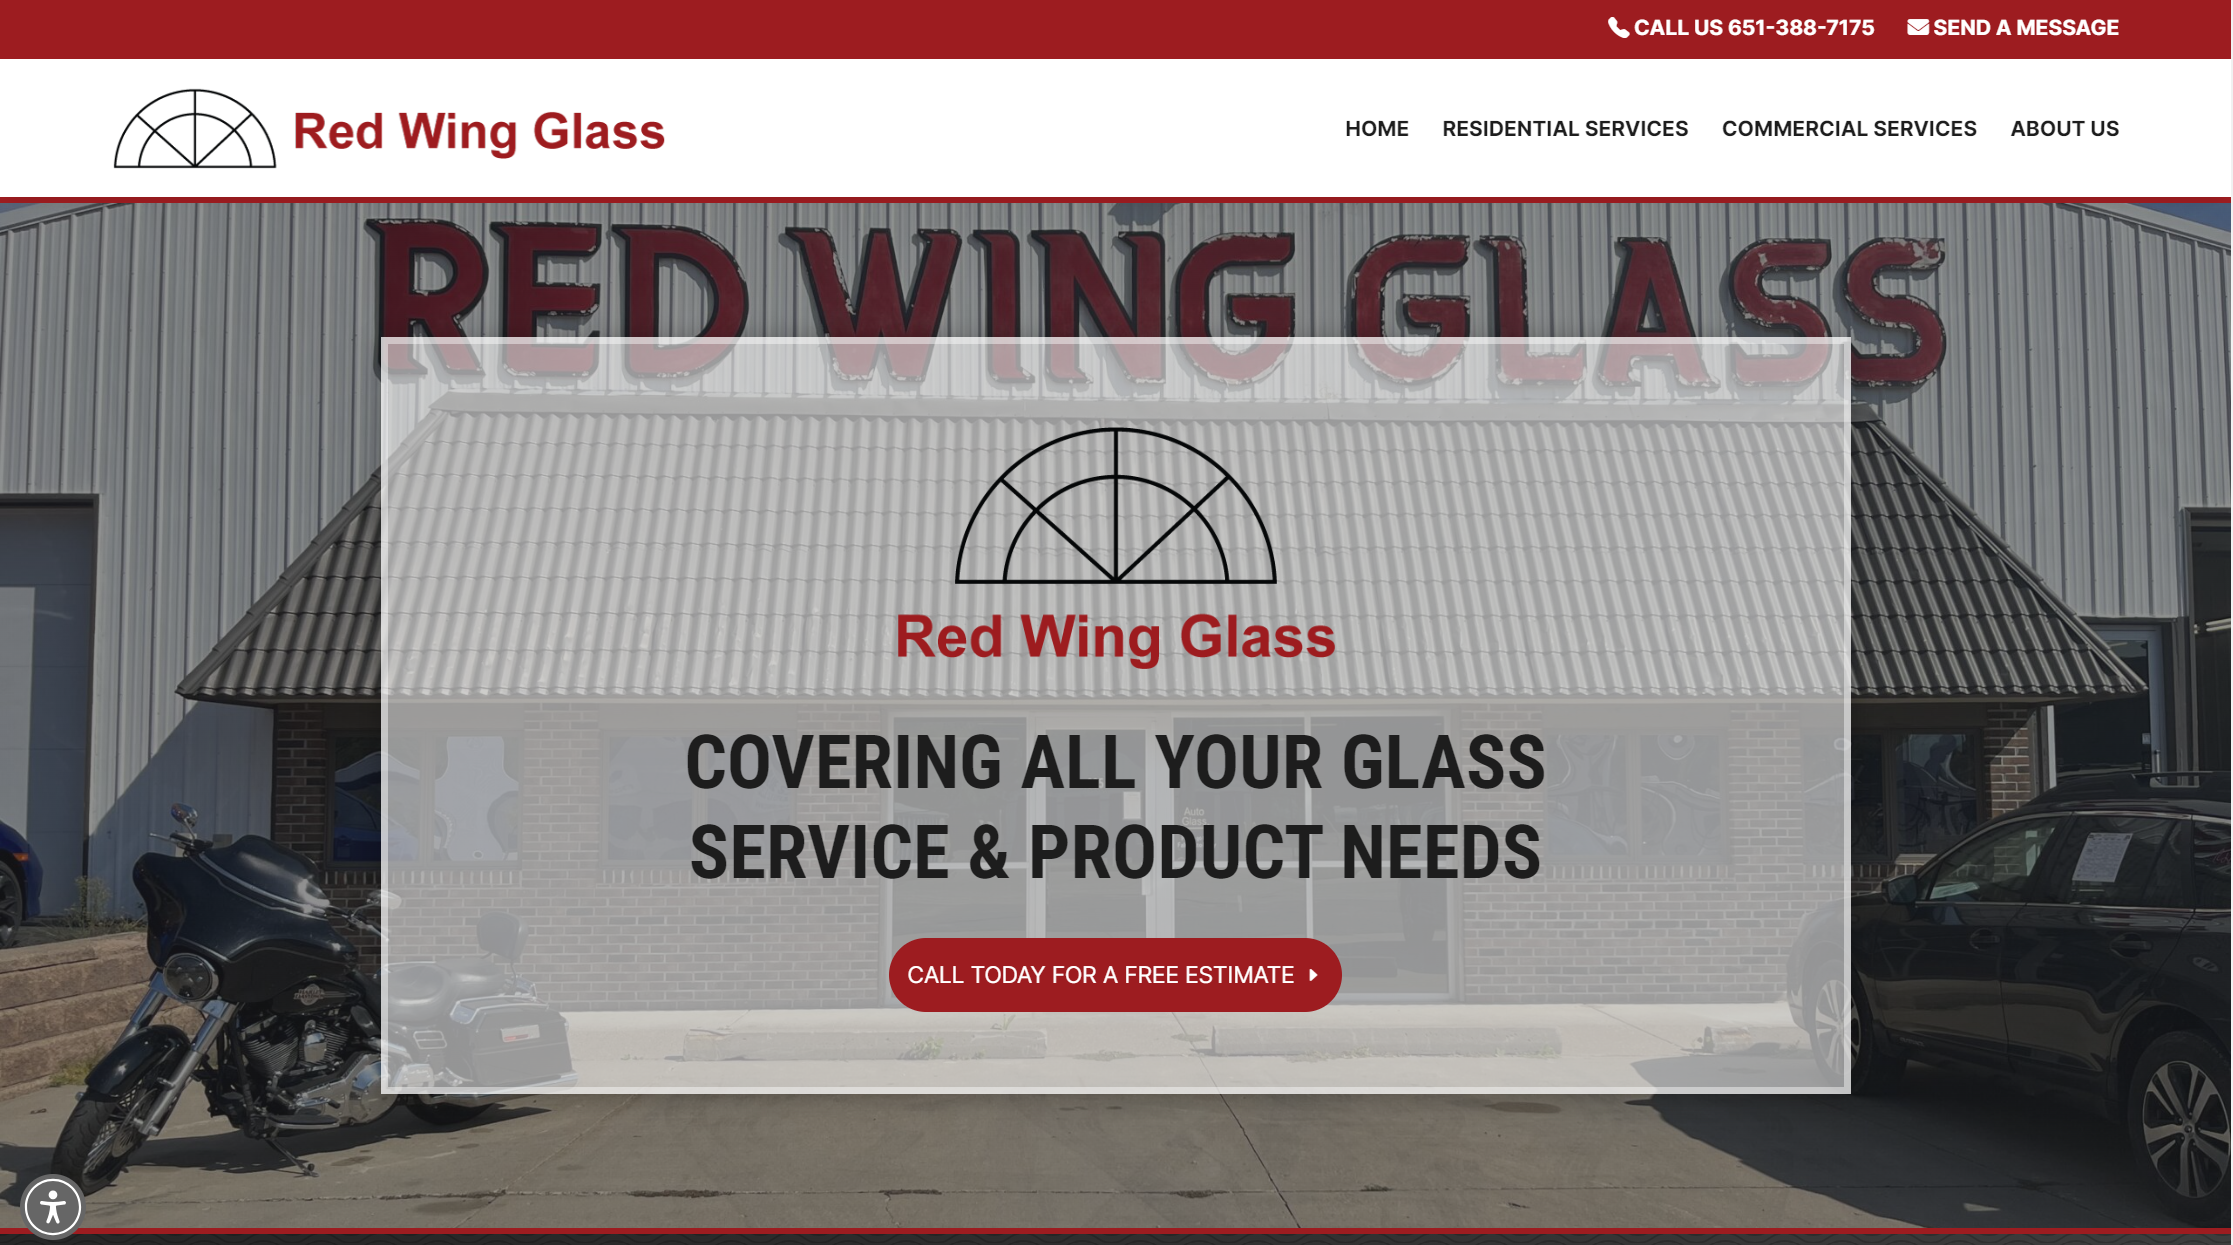 Red Wing Glass